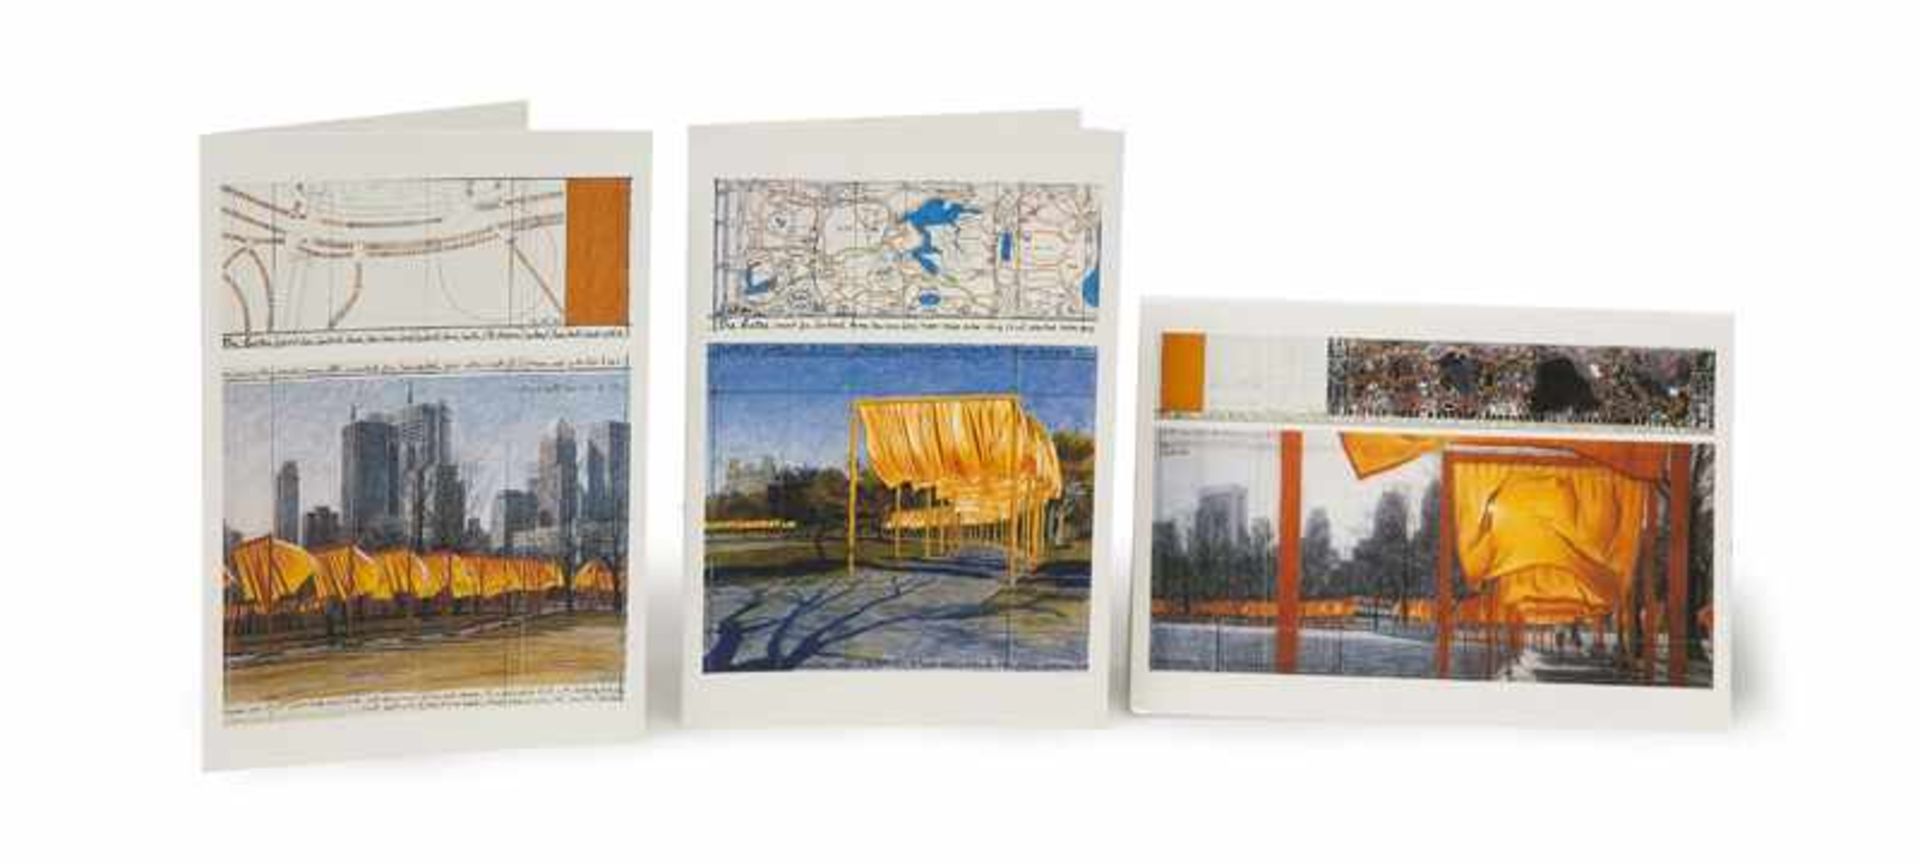 The Gates. Project for Central Park, New York.Published by Kunstverlag Schumacher GmbH,